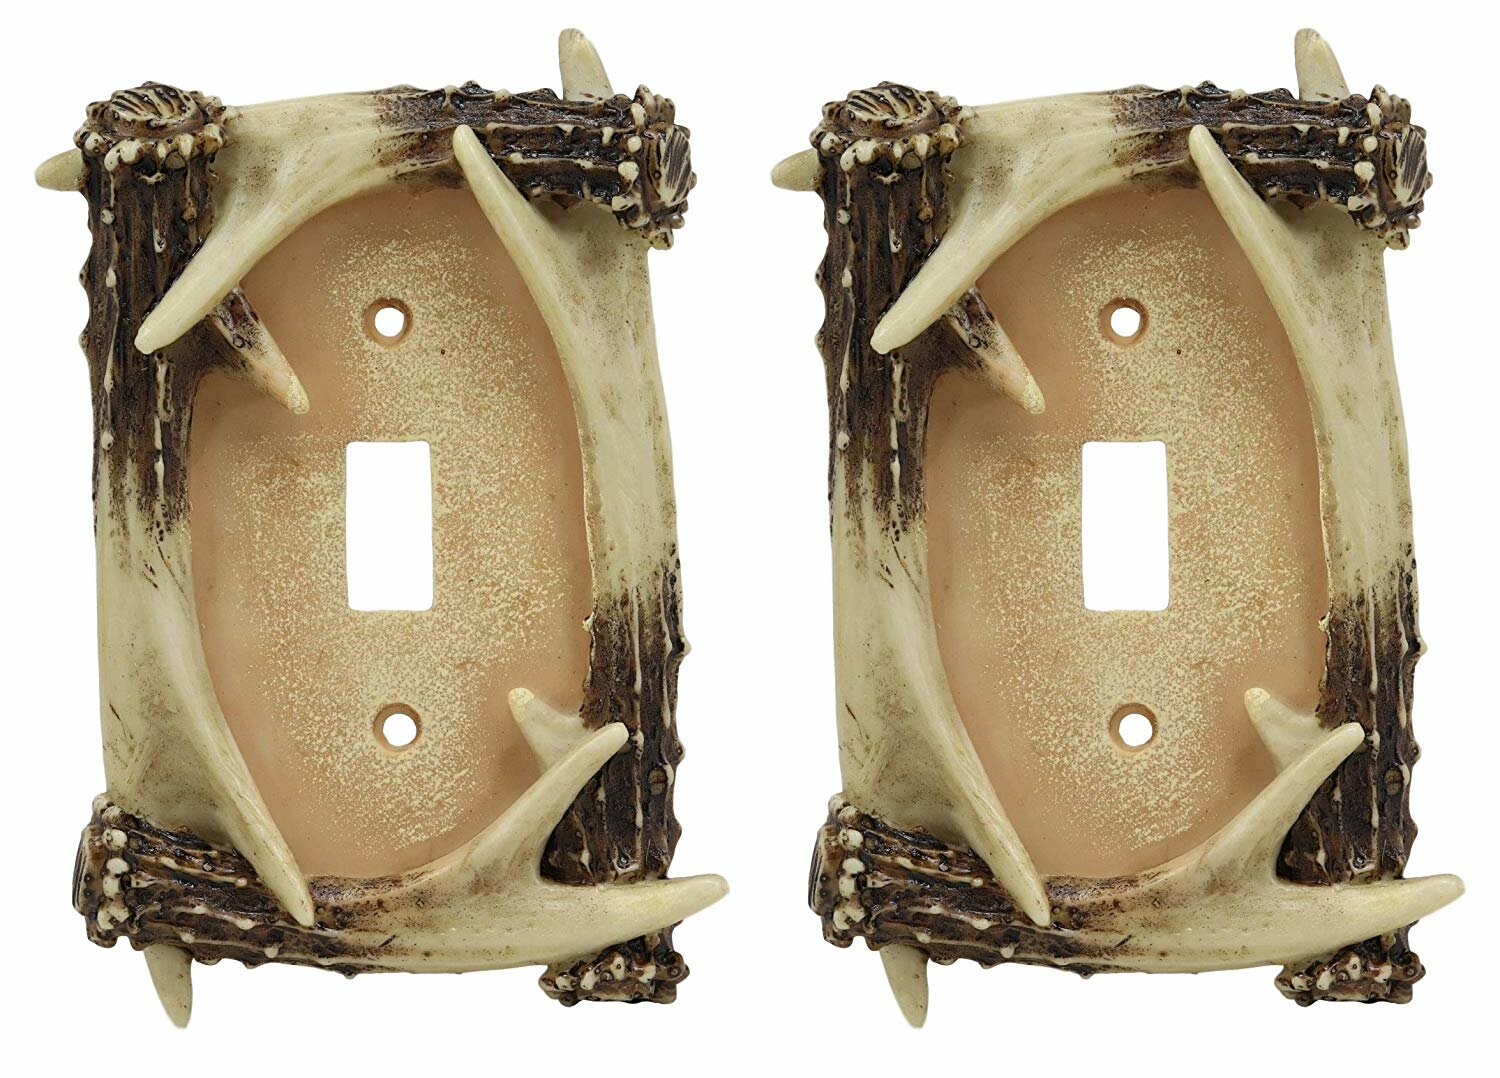 Faux Deer Antler Single Light Switch Plate Cover Western Rustic Lodge 6 Pack 